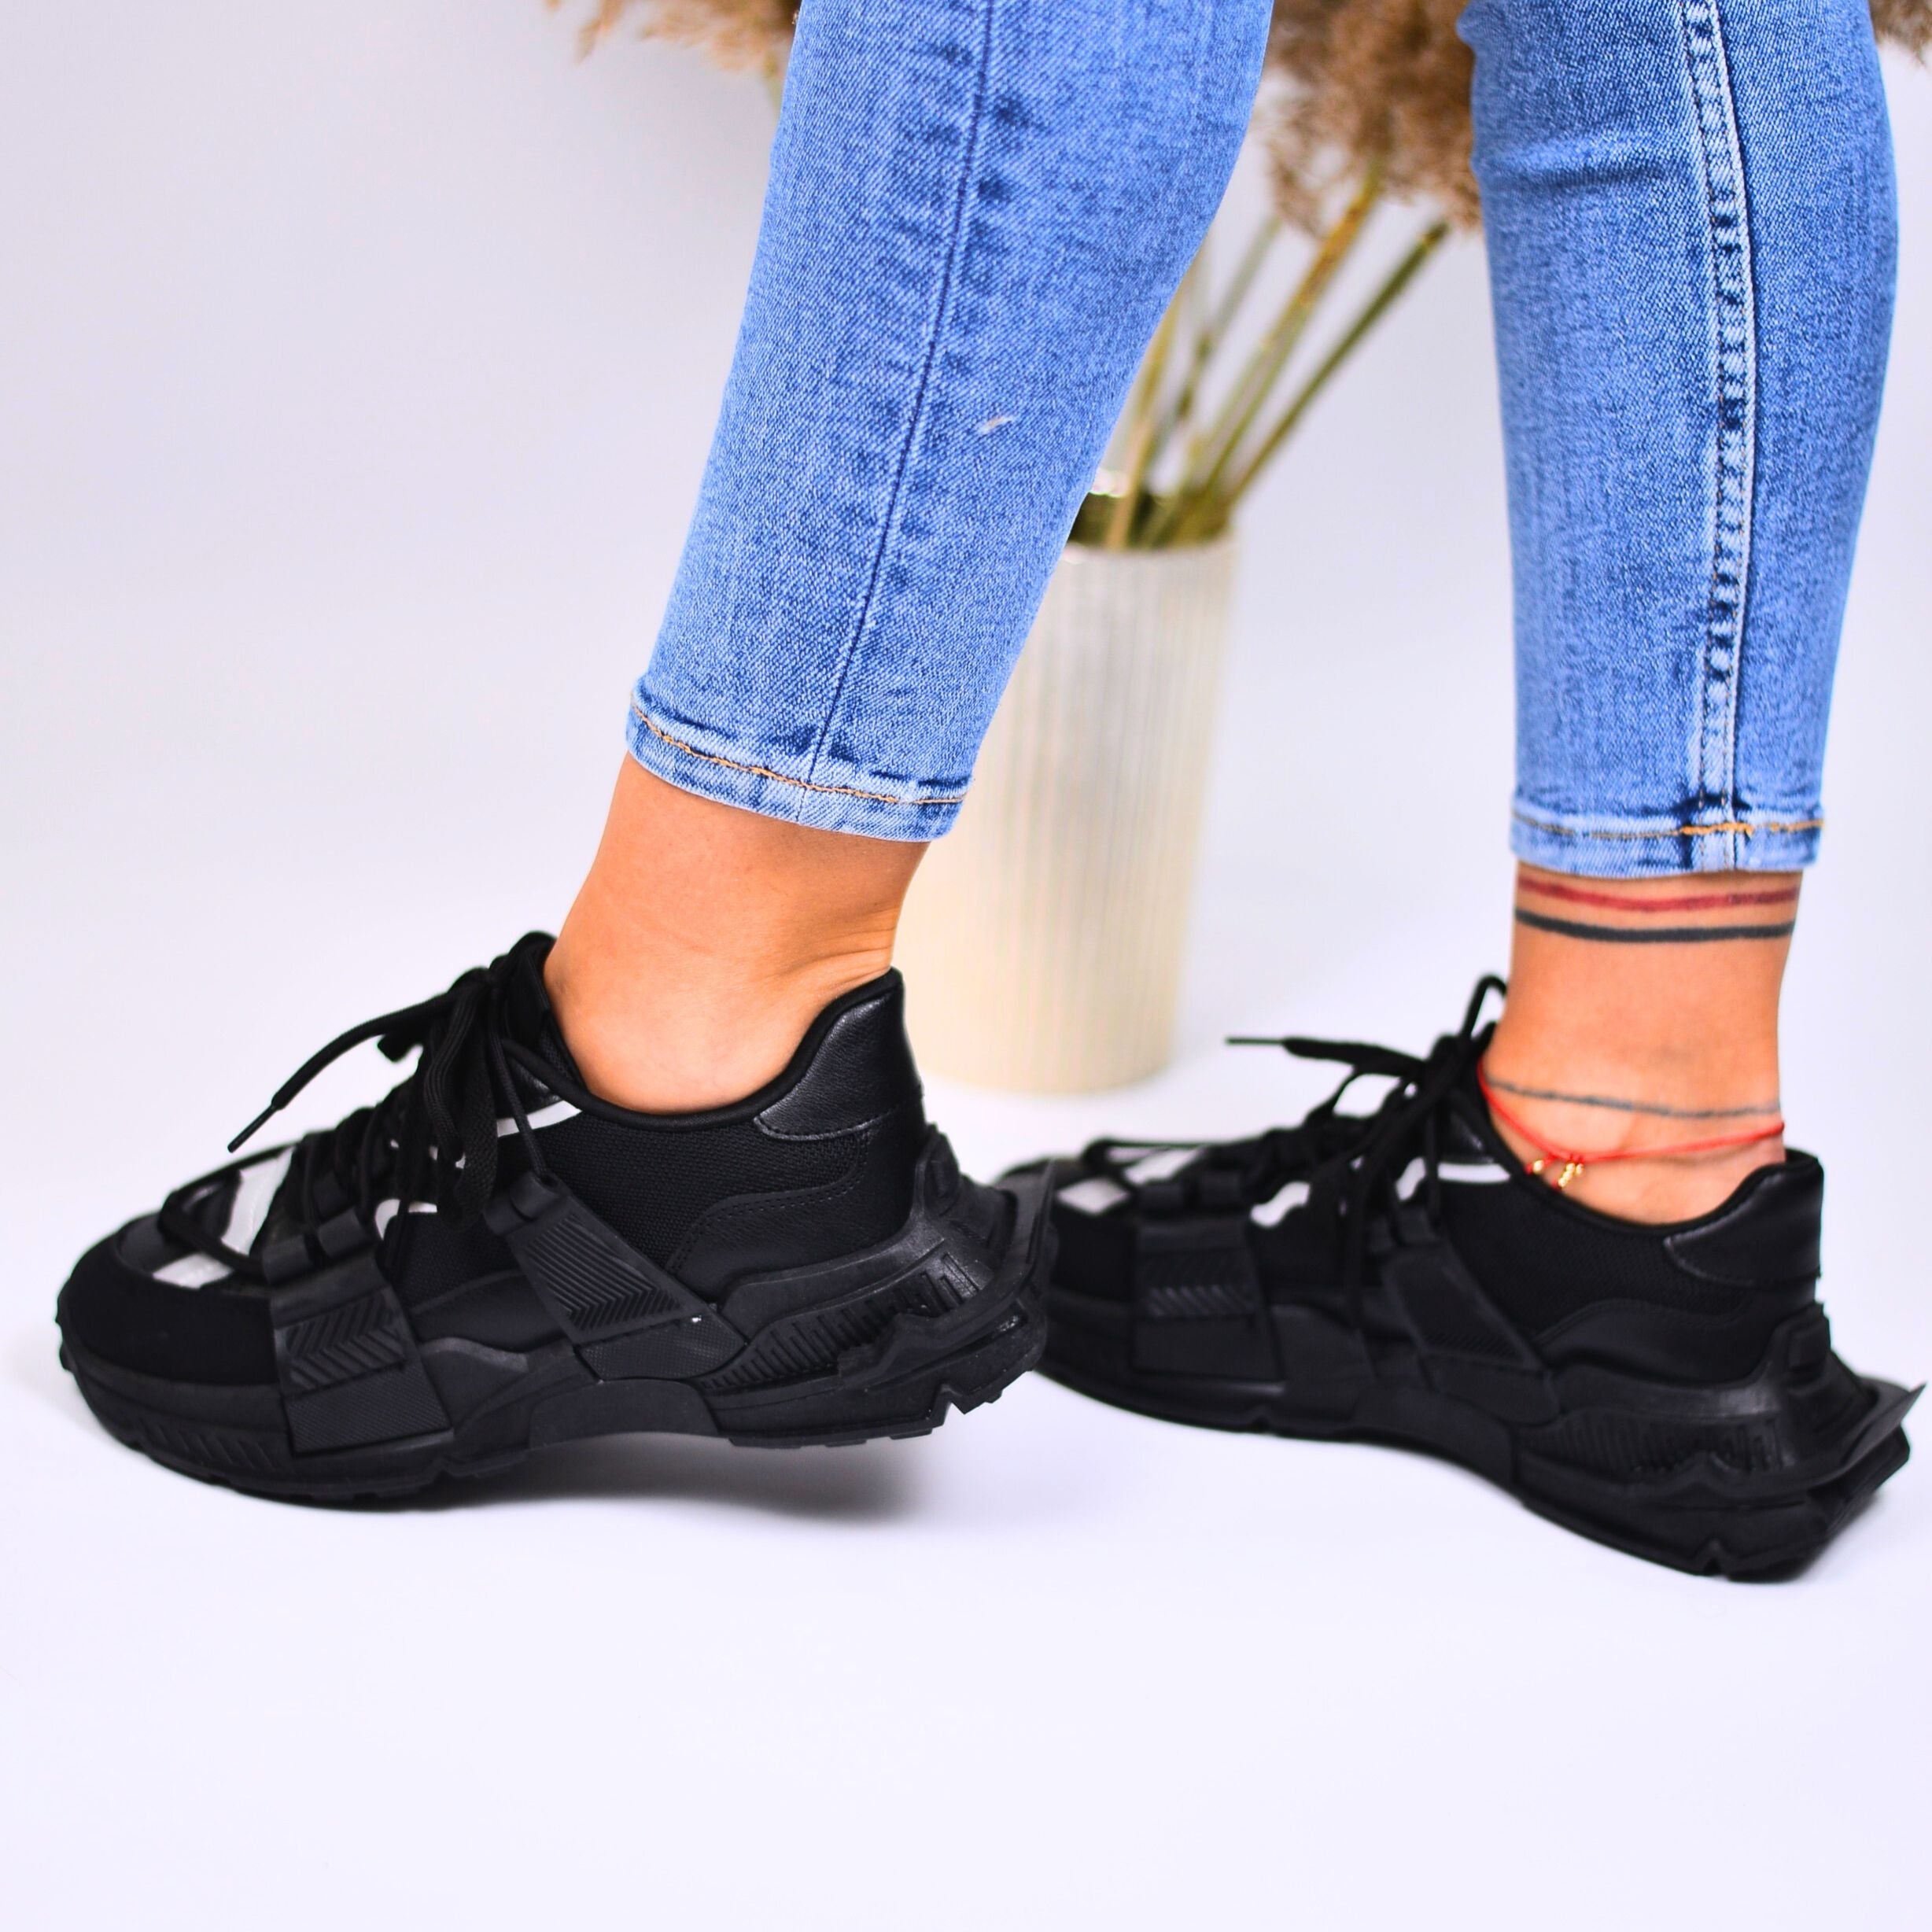 Women's Black Dolce Sneakers Made Of Ecological Leather And Textile Material